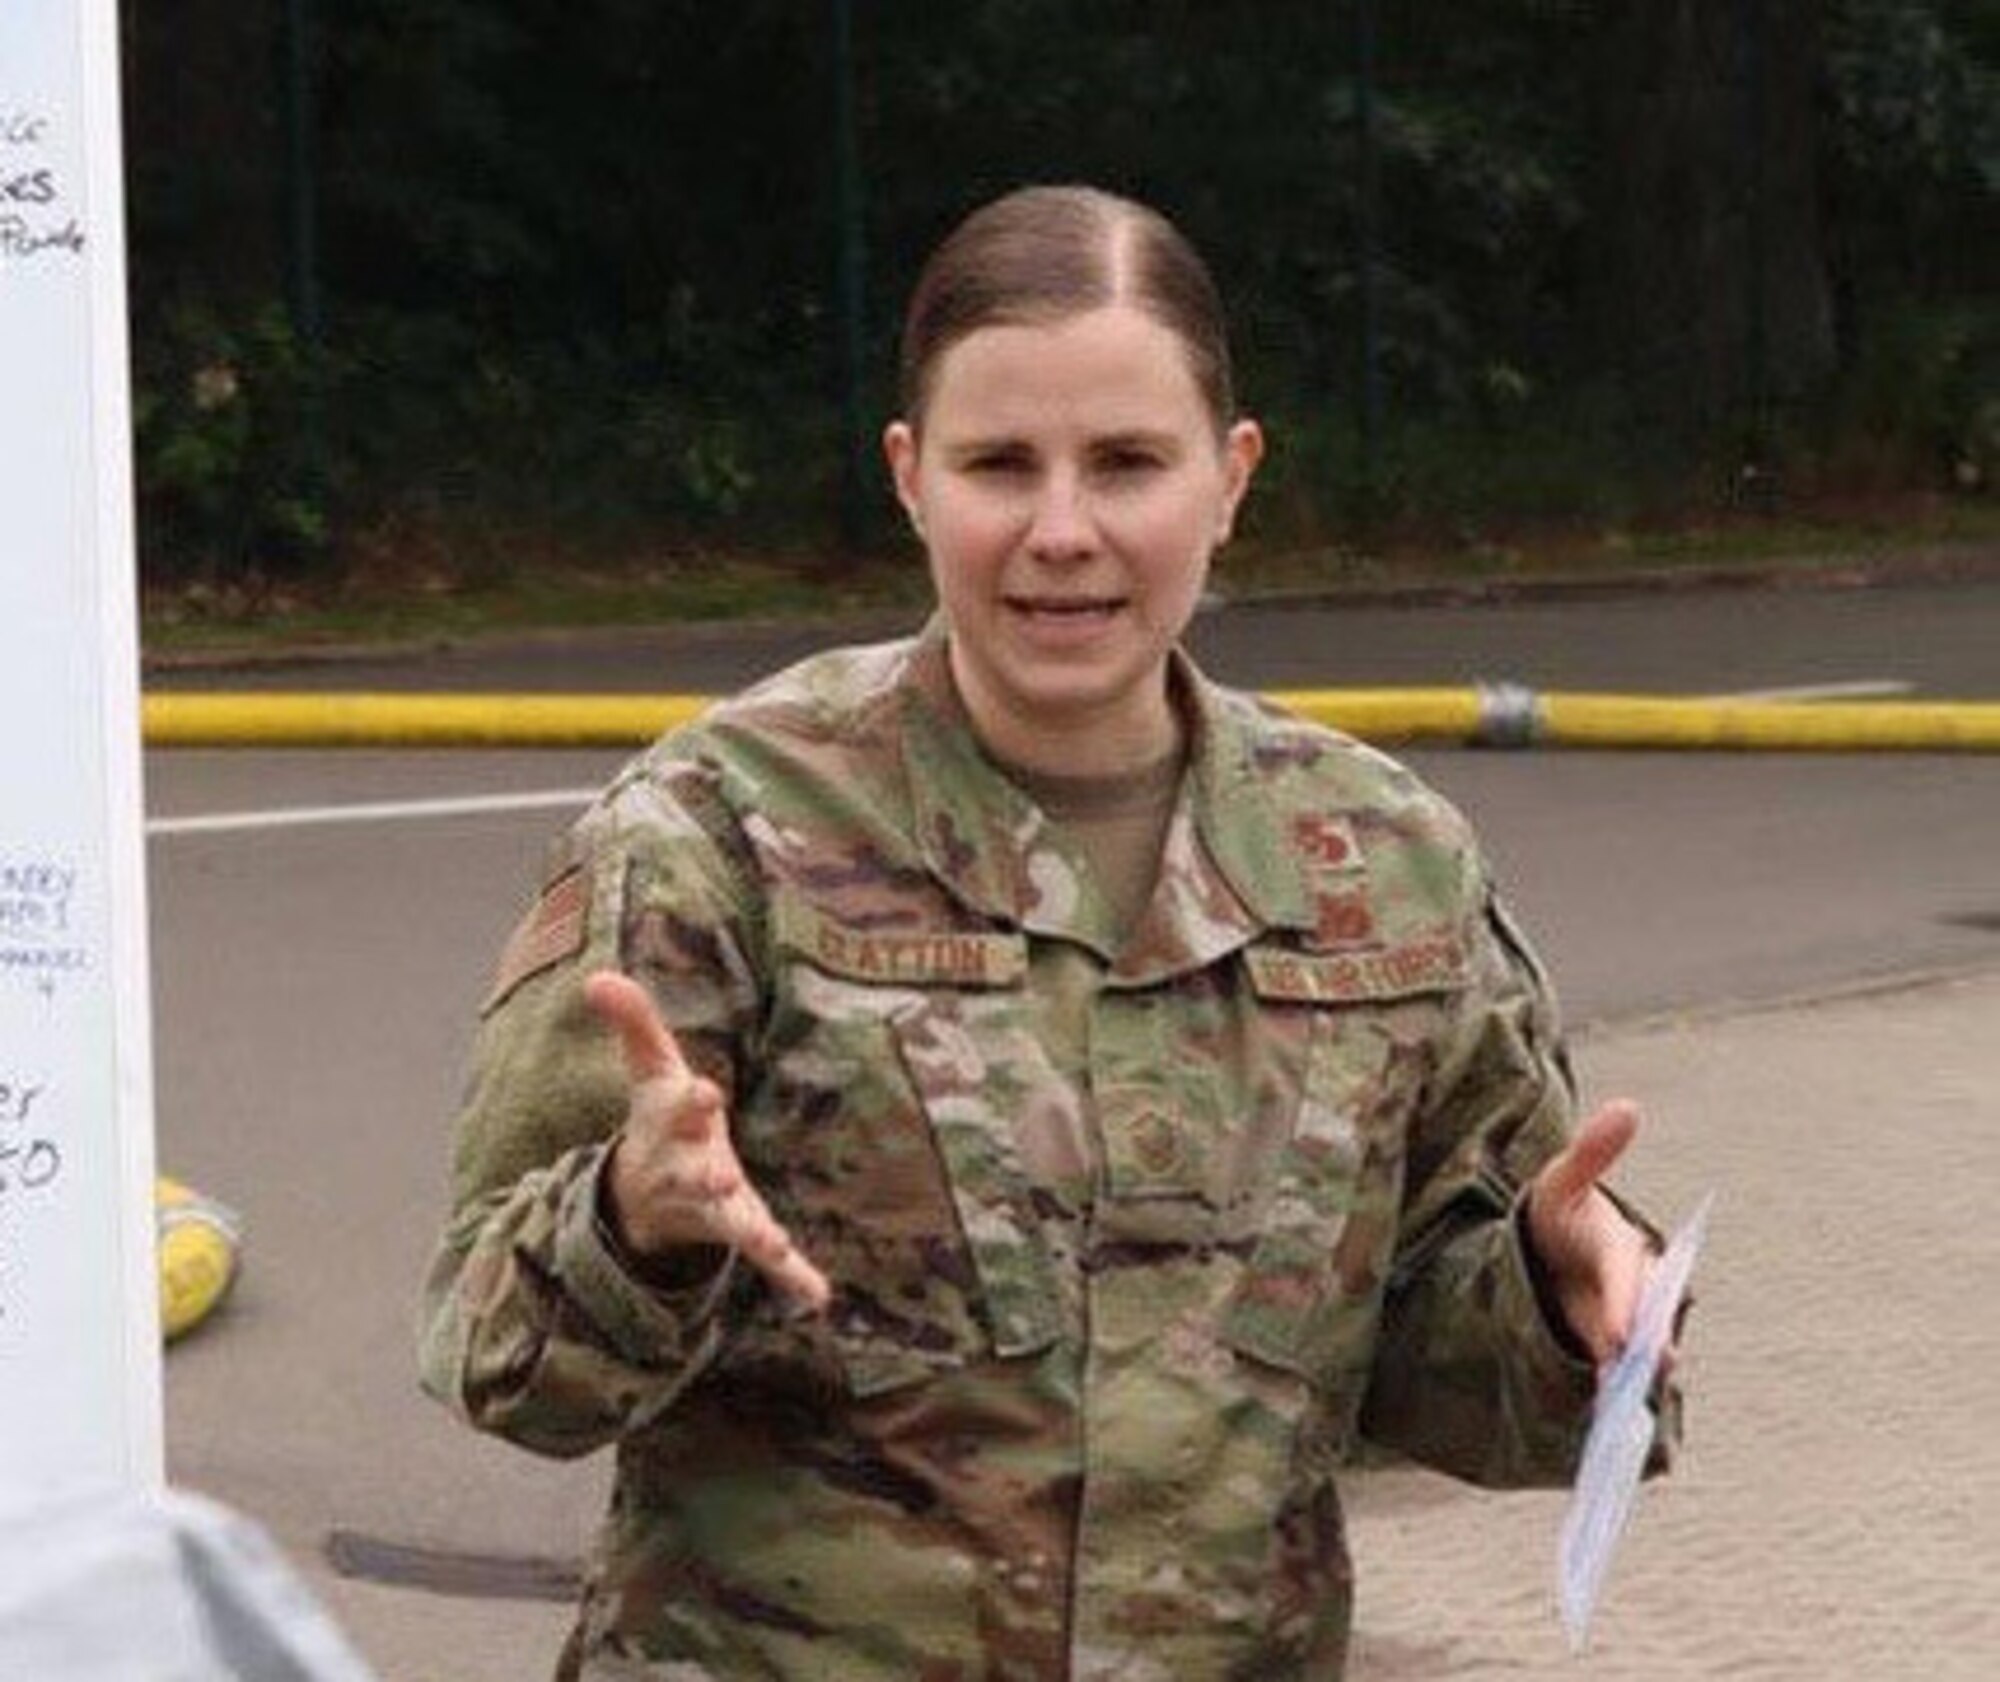 U.S. Air Force Master Sgt. Jessica Clayton, 786th Civil Engineer Squadron Emergency Management Operations noncommissioned officer in charge, gives a safety and team objective brief to responders at Landstuhl Regional Medical Center, Germany, June 16, 2020.